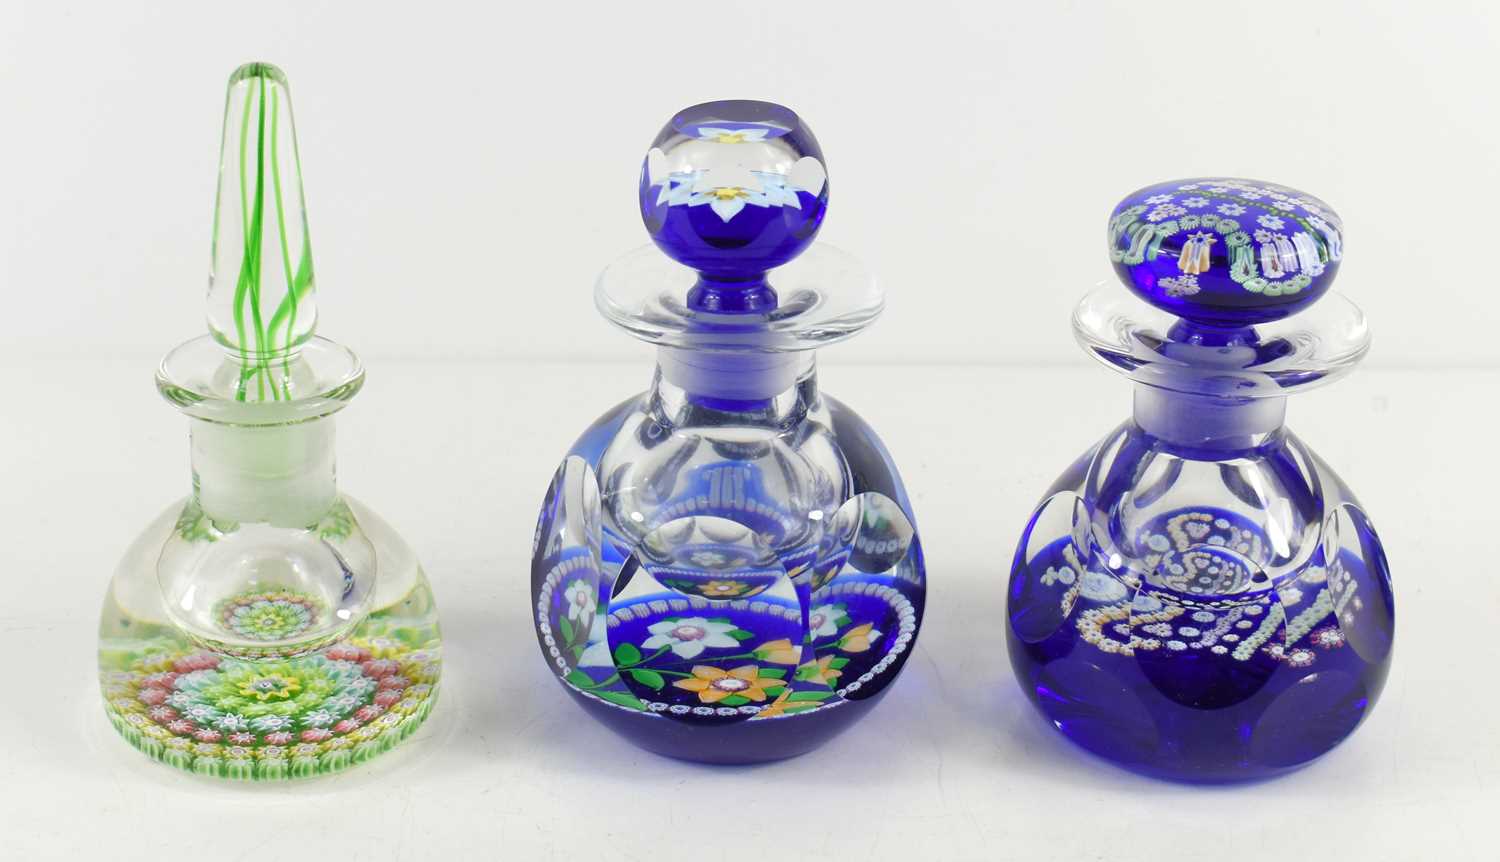 Two Caithness of Scotland glass ink bottles: Whitefriars Royal Golden Wedding 40/50, Royal Wedding